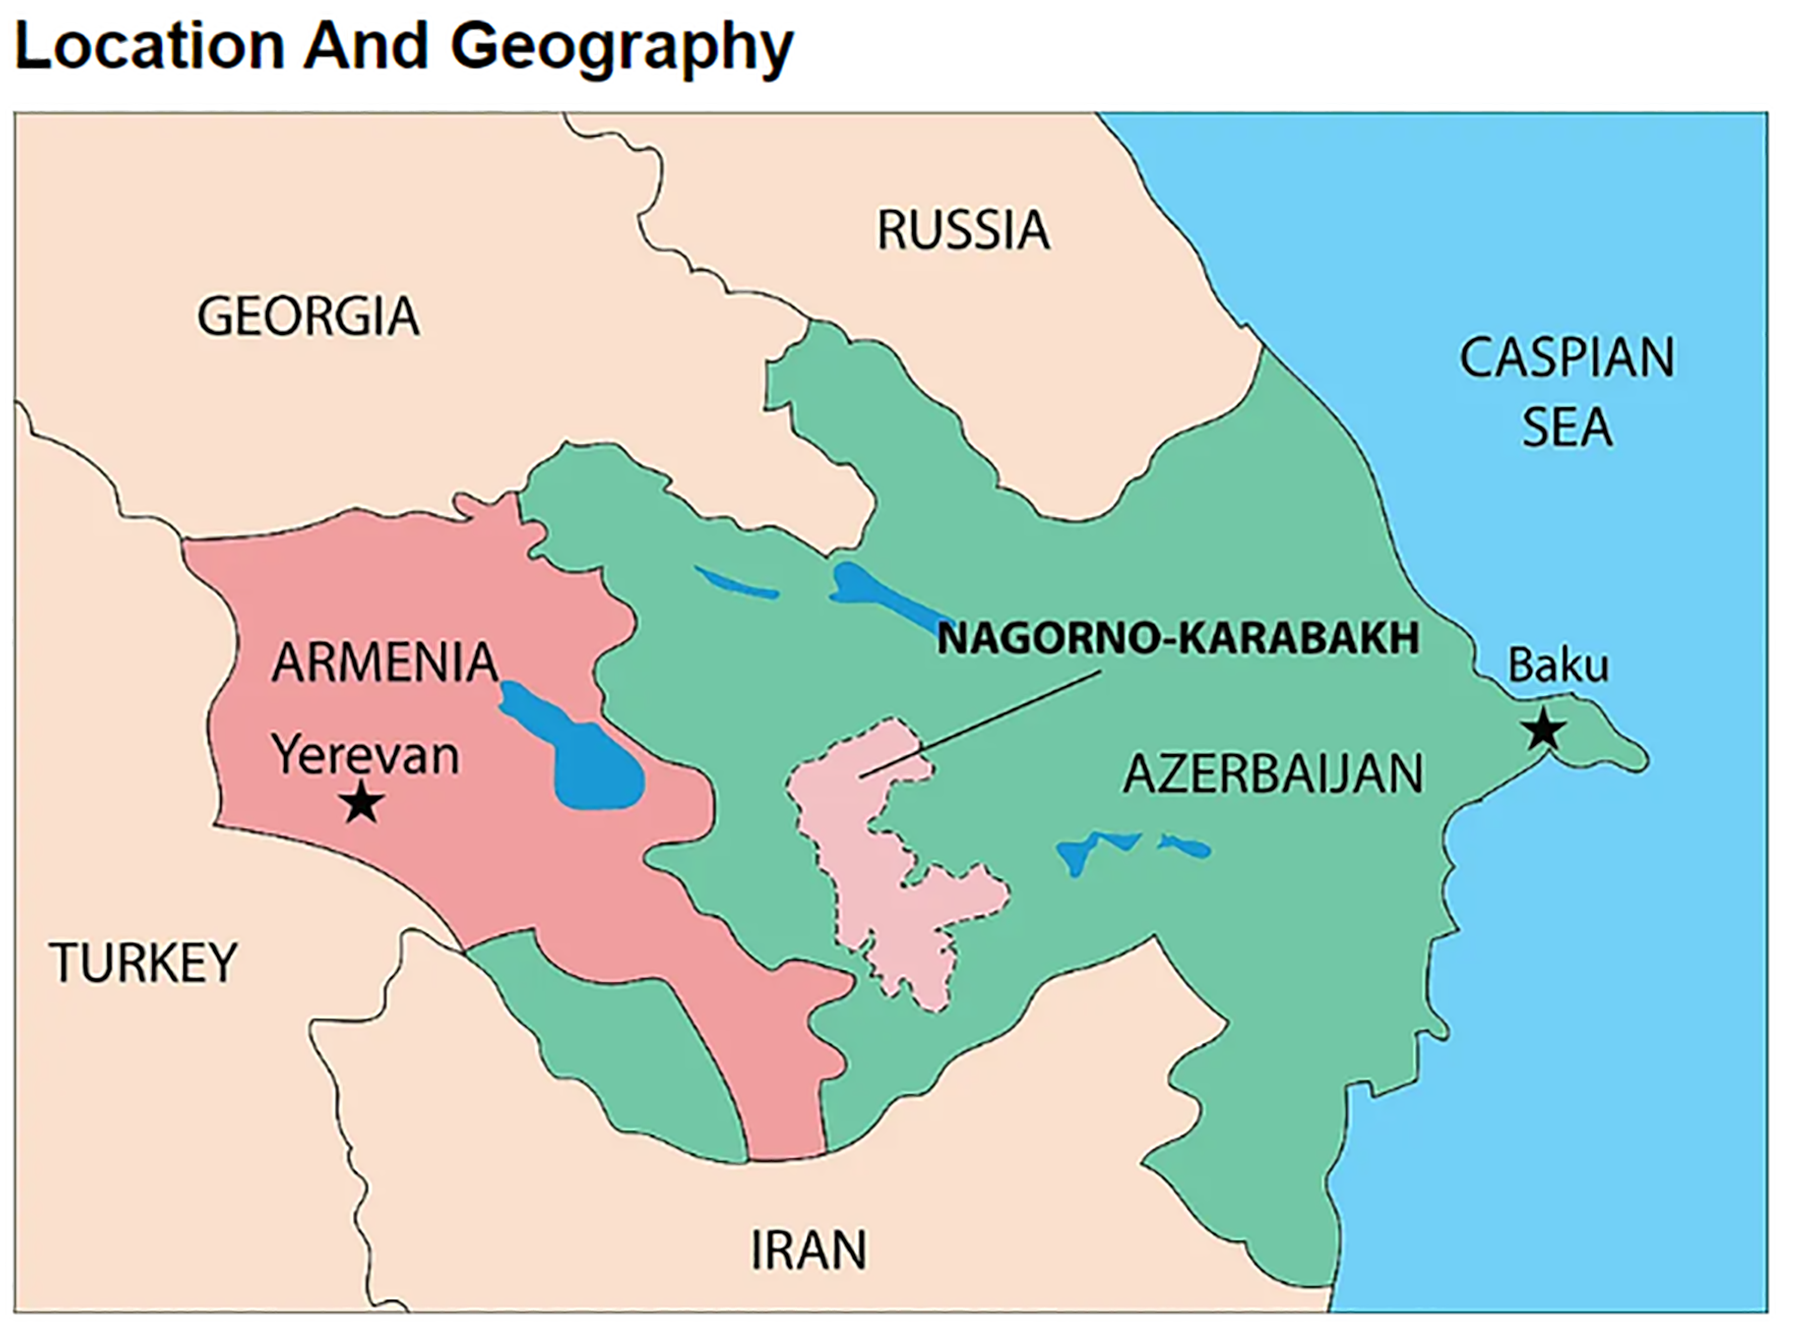 Loss of Nagorno-Karabakh weakens Armenia, abandoned by Russia and the West:  'Everyone is afraid of another war', International